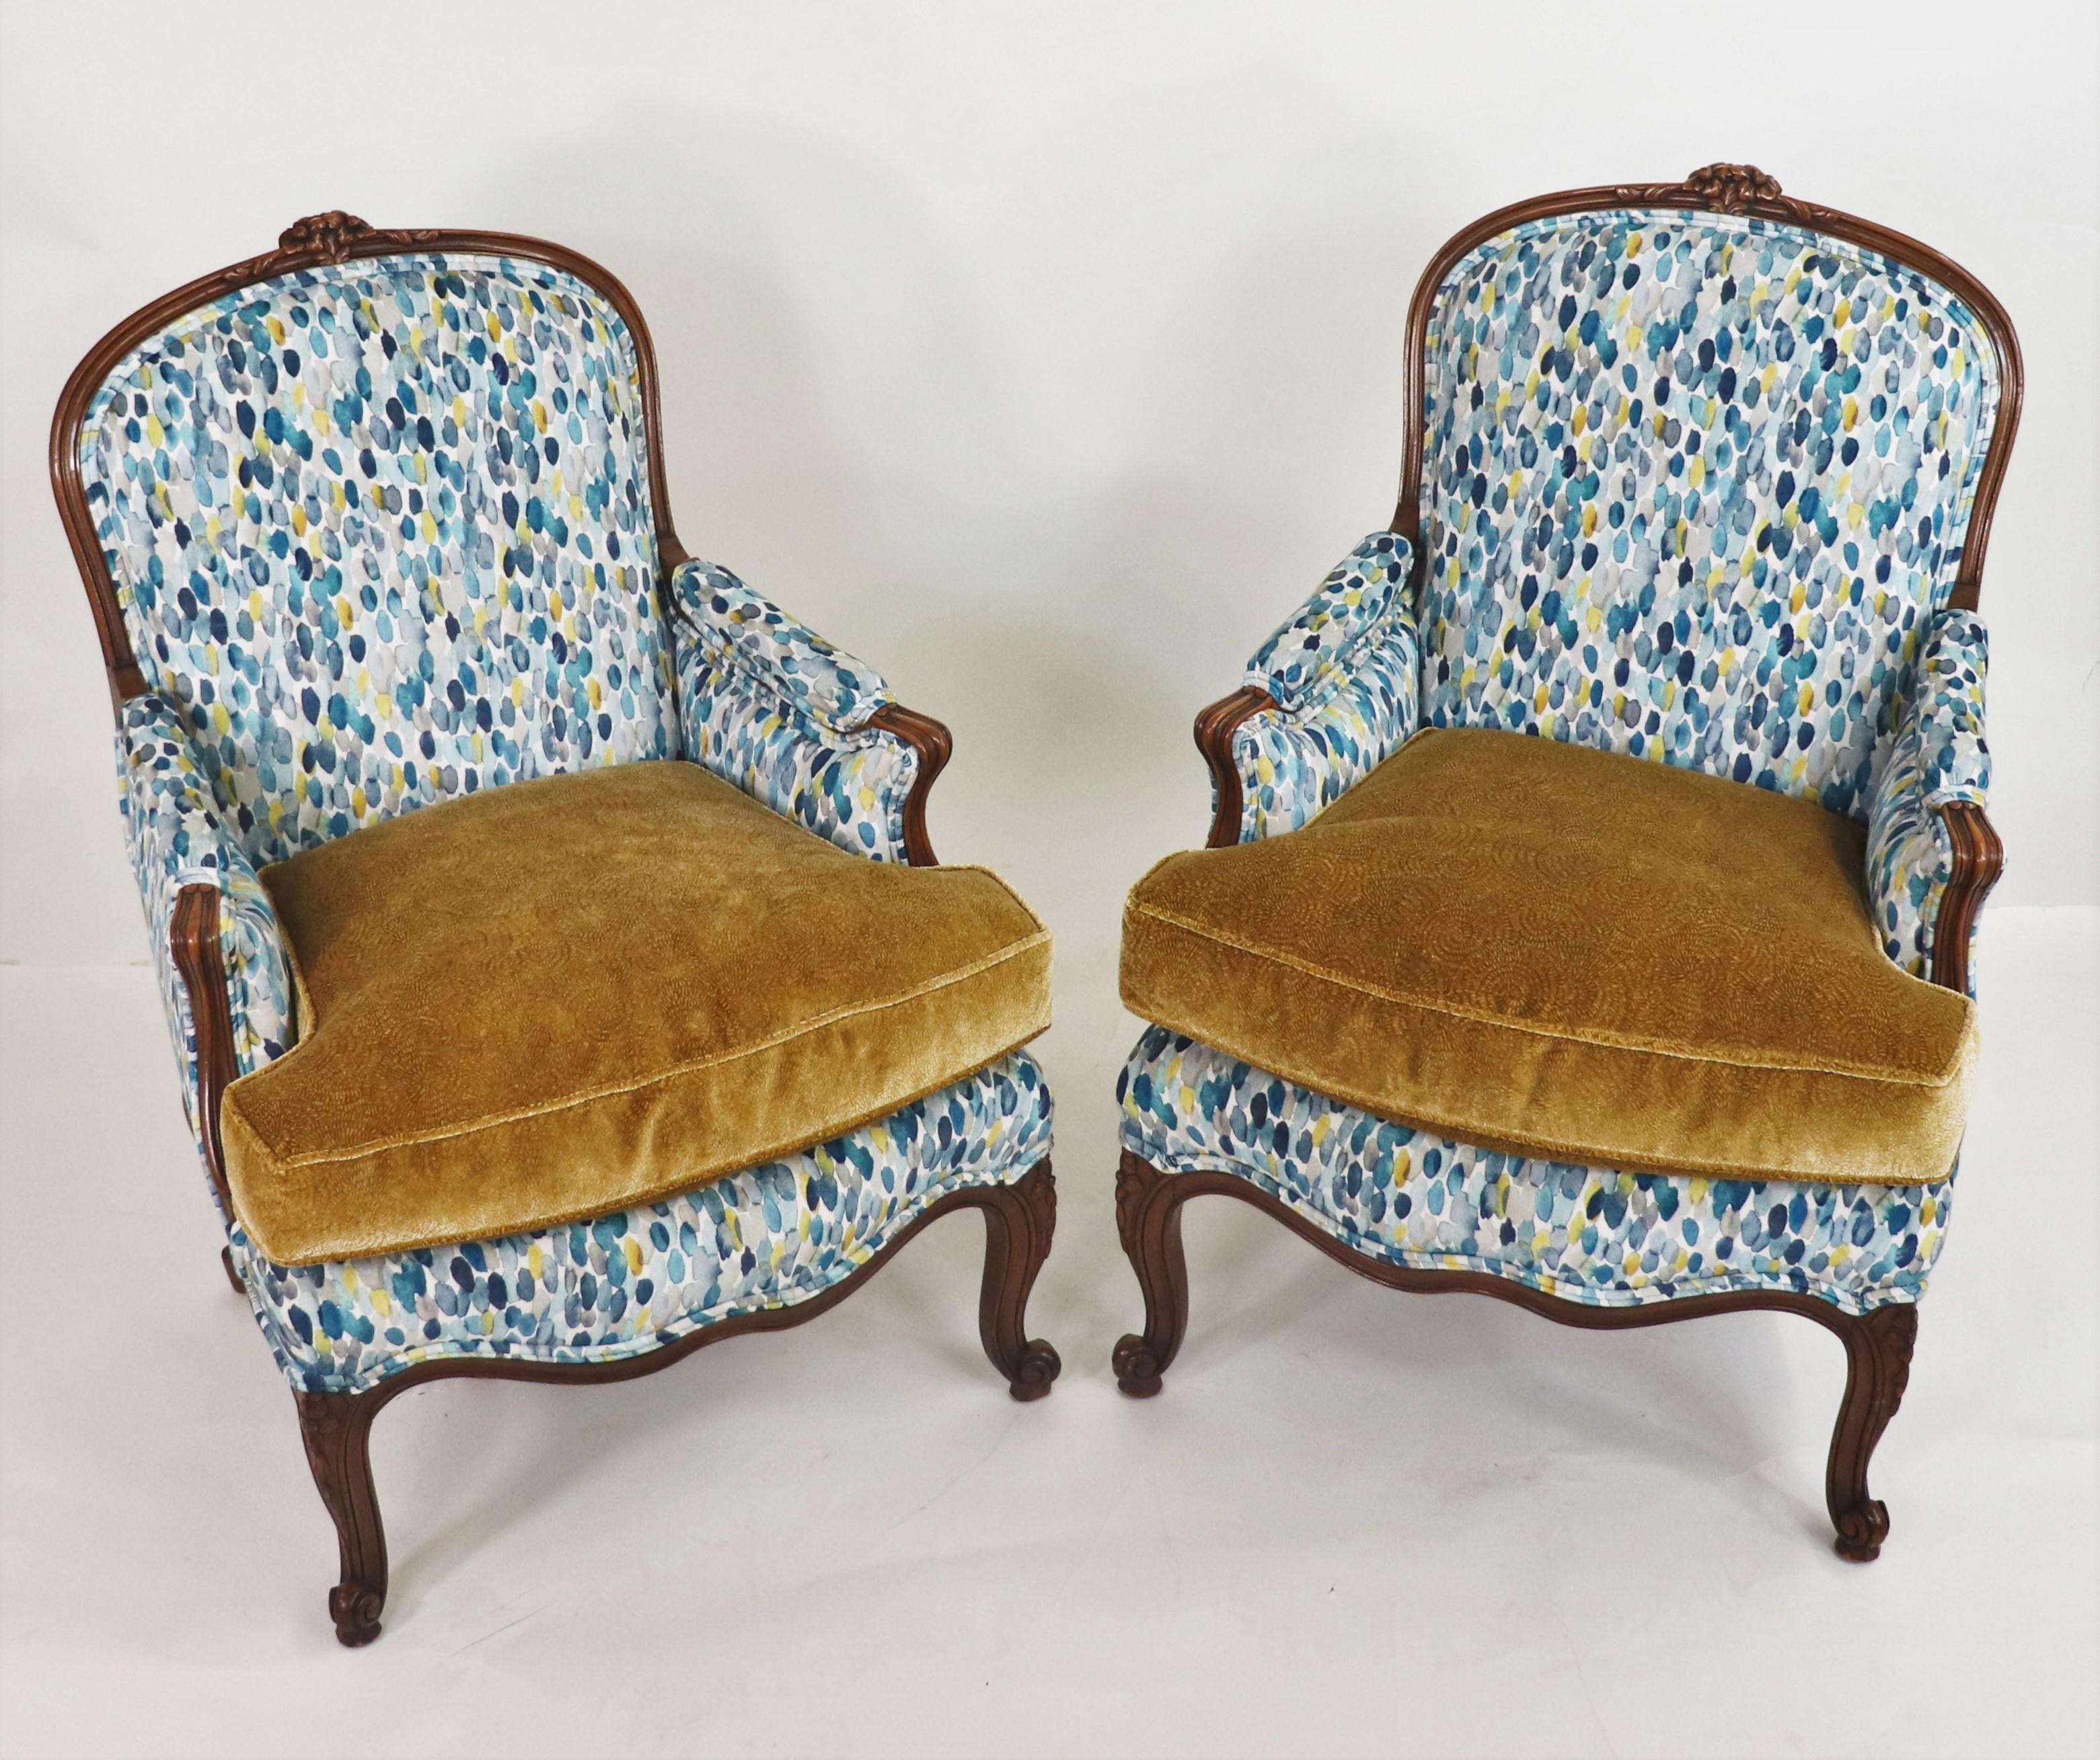 Pair of Mid-19th Century Louis XV Style Bergère Armchairs with Modern Fabrics For Sale 2